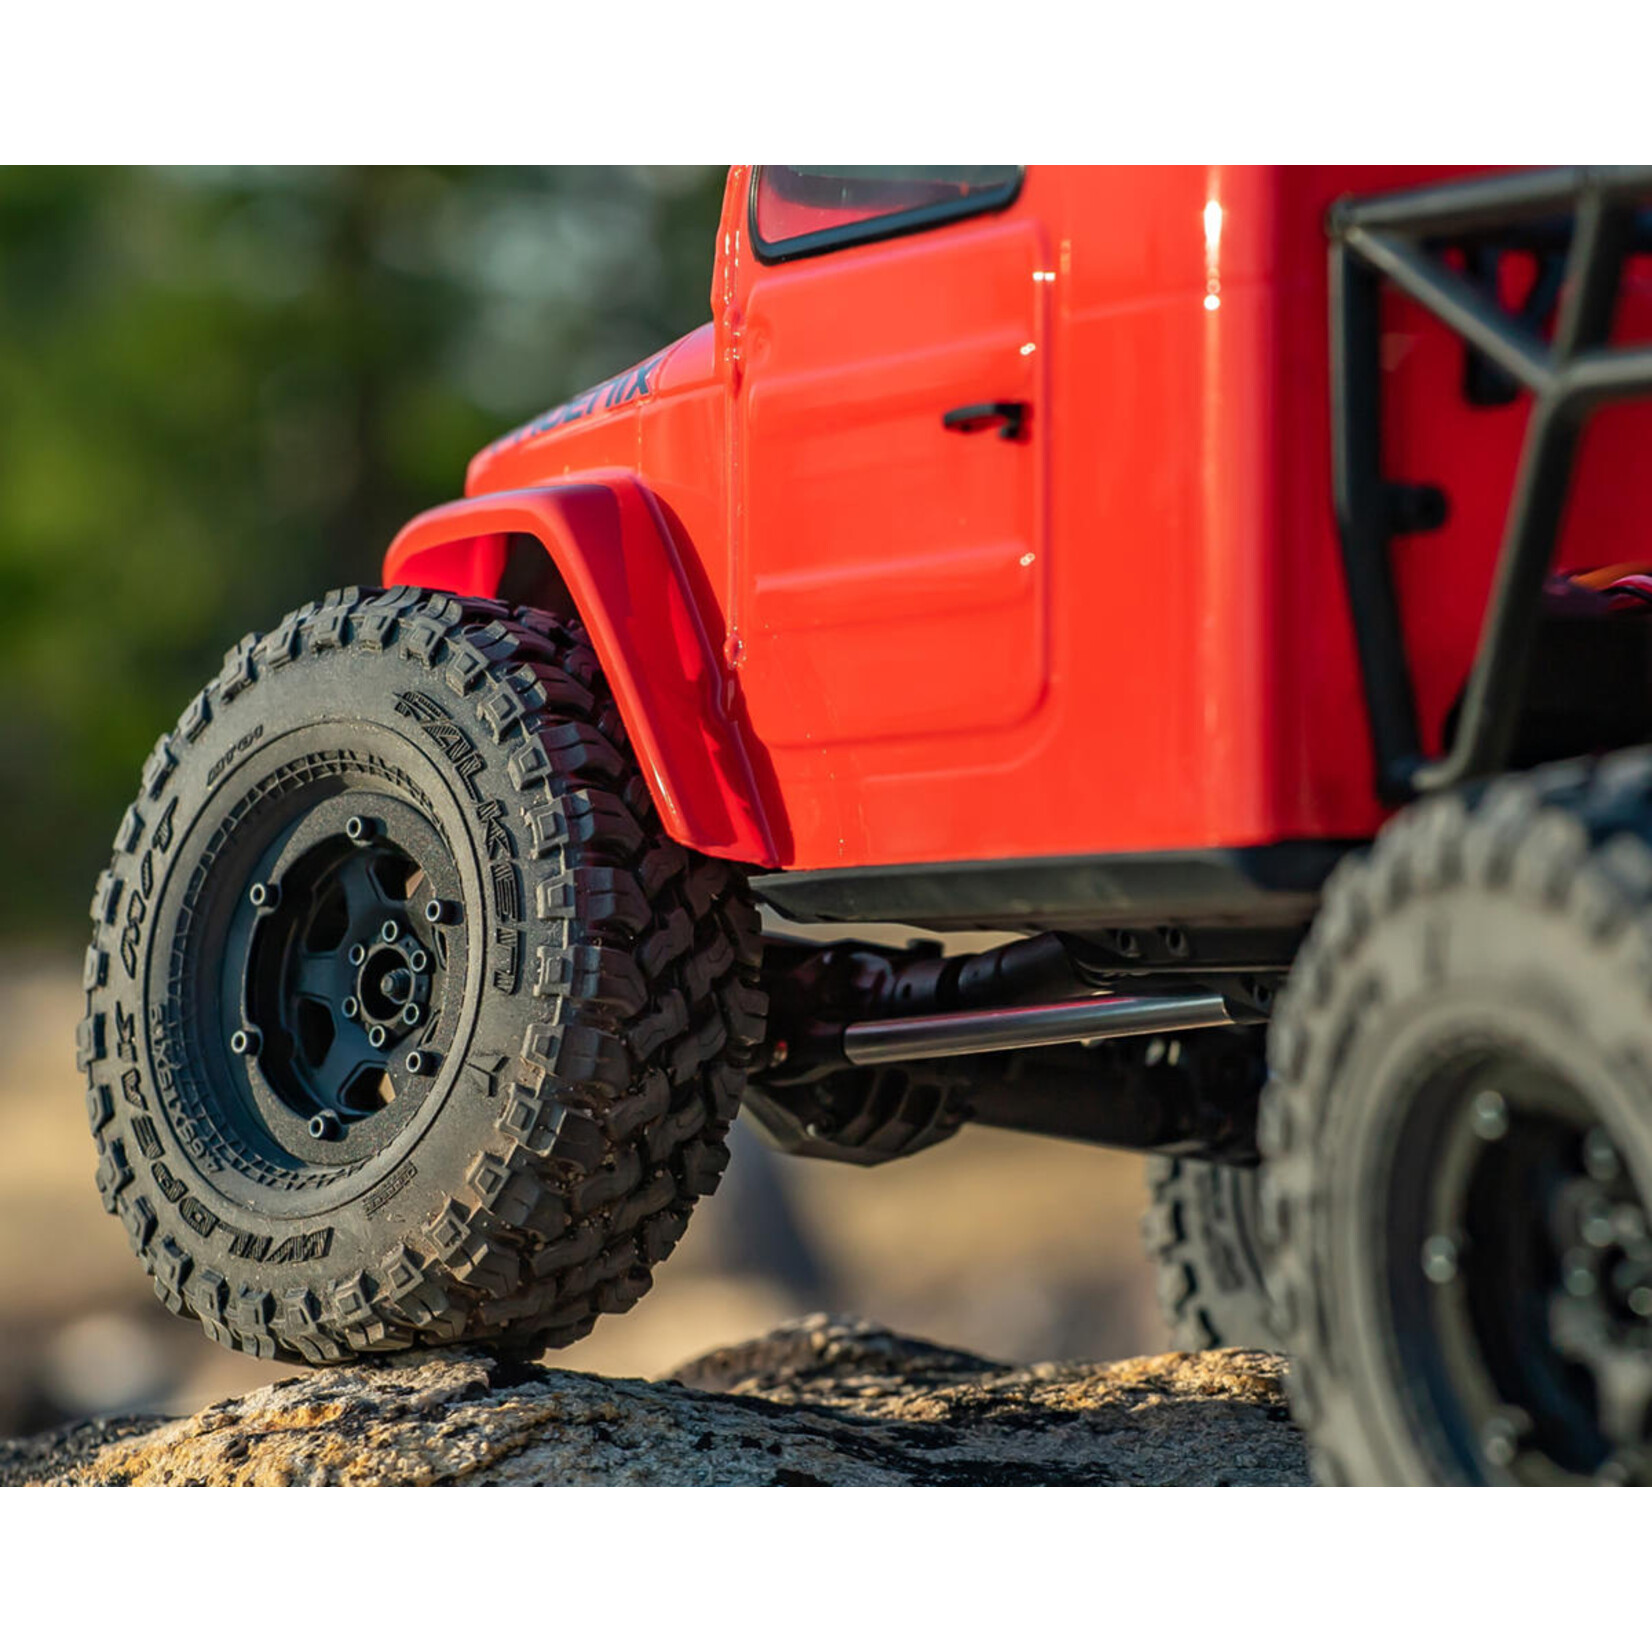 Vanquish Products Vanquish Products VS4-10 Phoenix Straight Axle RTR Rock Crawler (Red) #VPS09011A